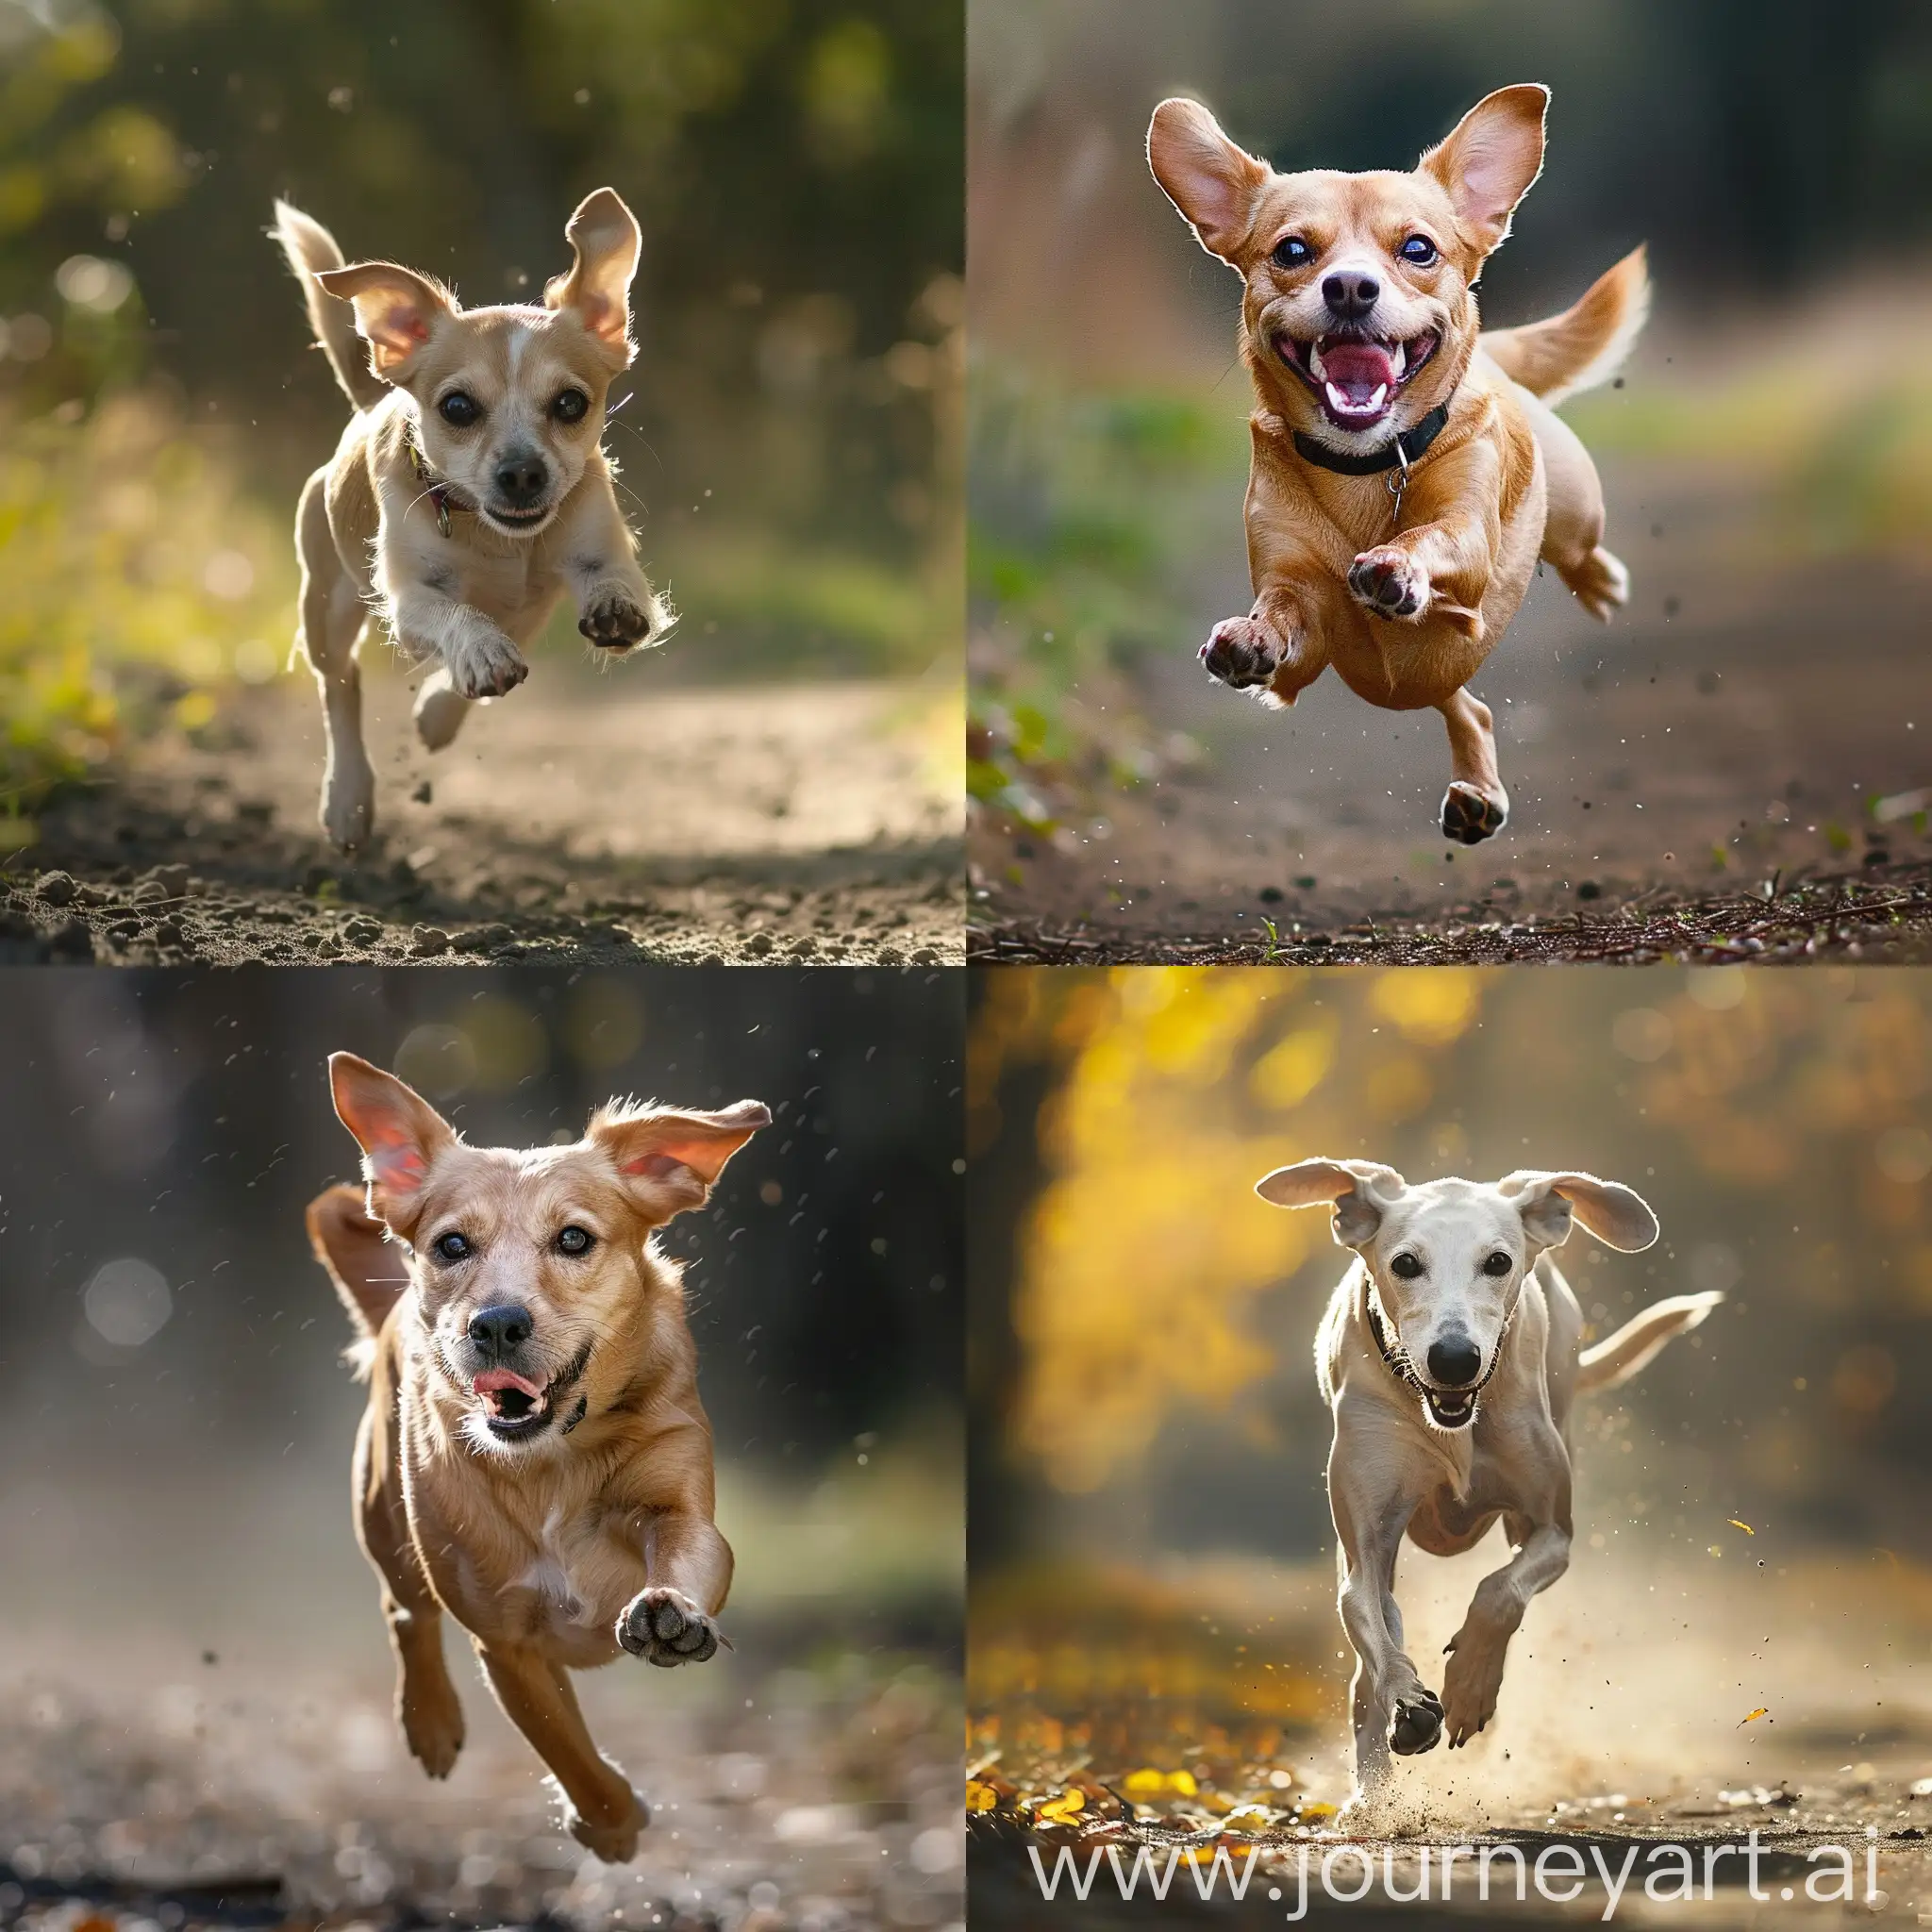 Energetic-Dog-Running-in-a-Vibrant-Landscape